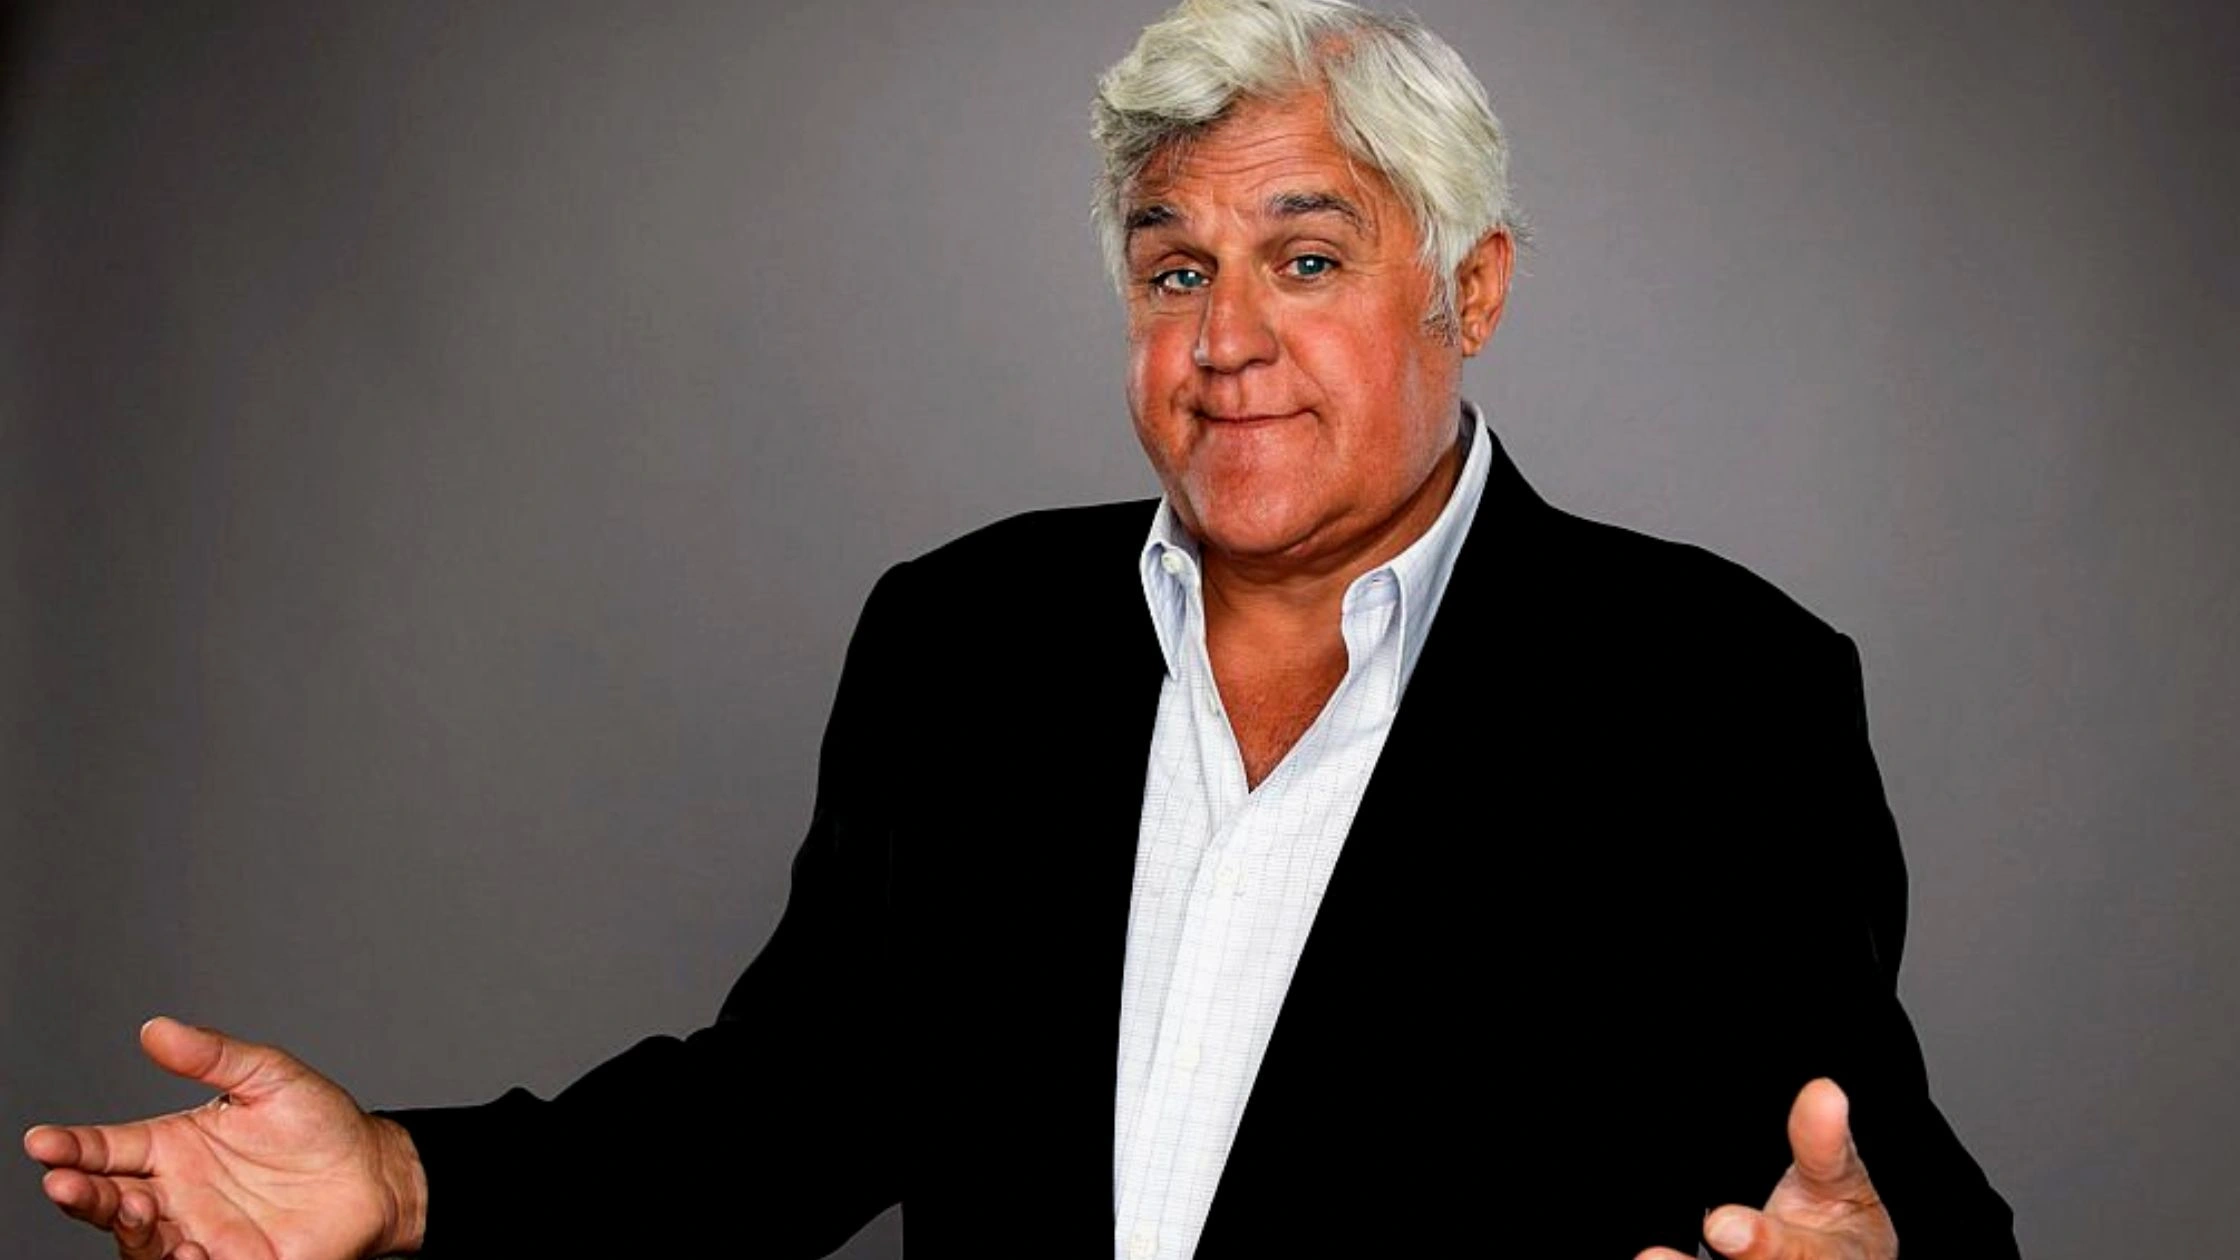 Jay Leno Accident He Suffered Bone Fracture In 2nd Accident After Announcing Vegas Return